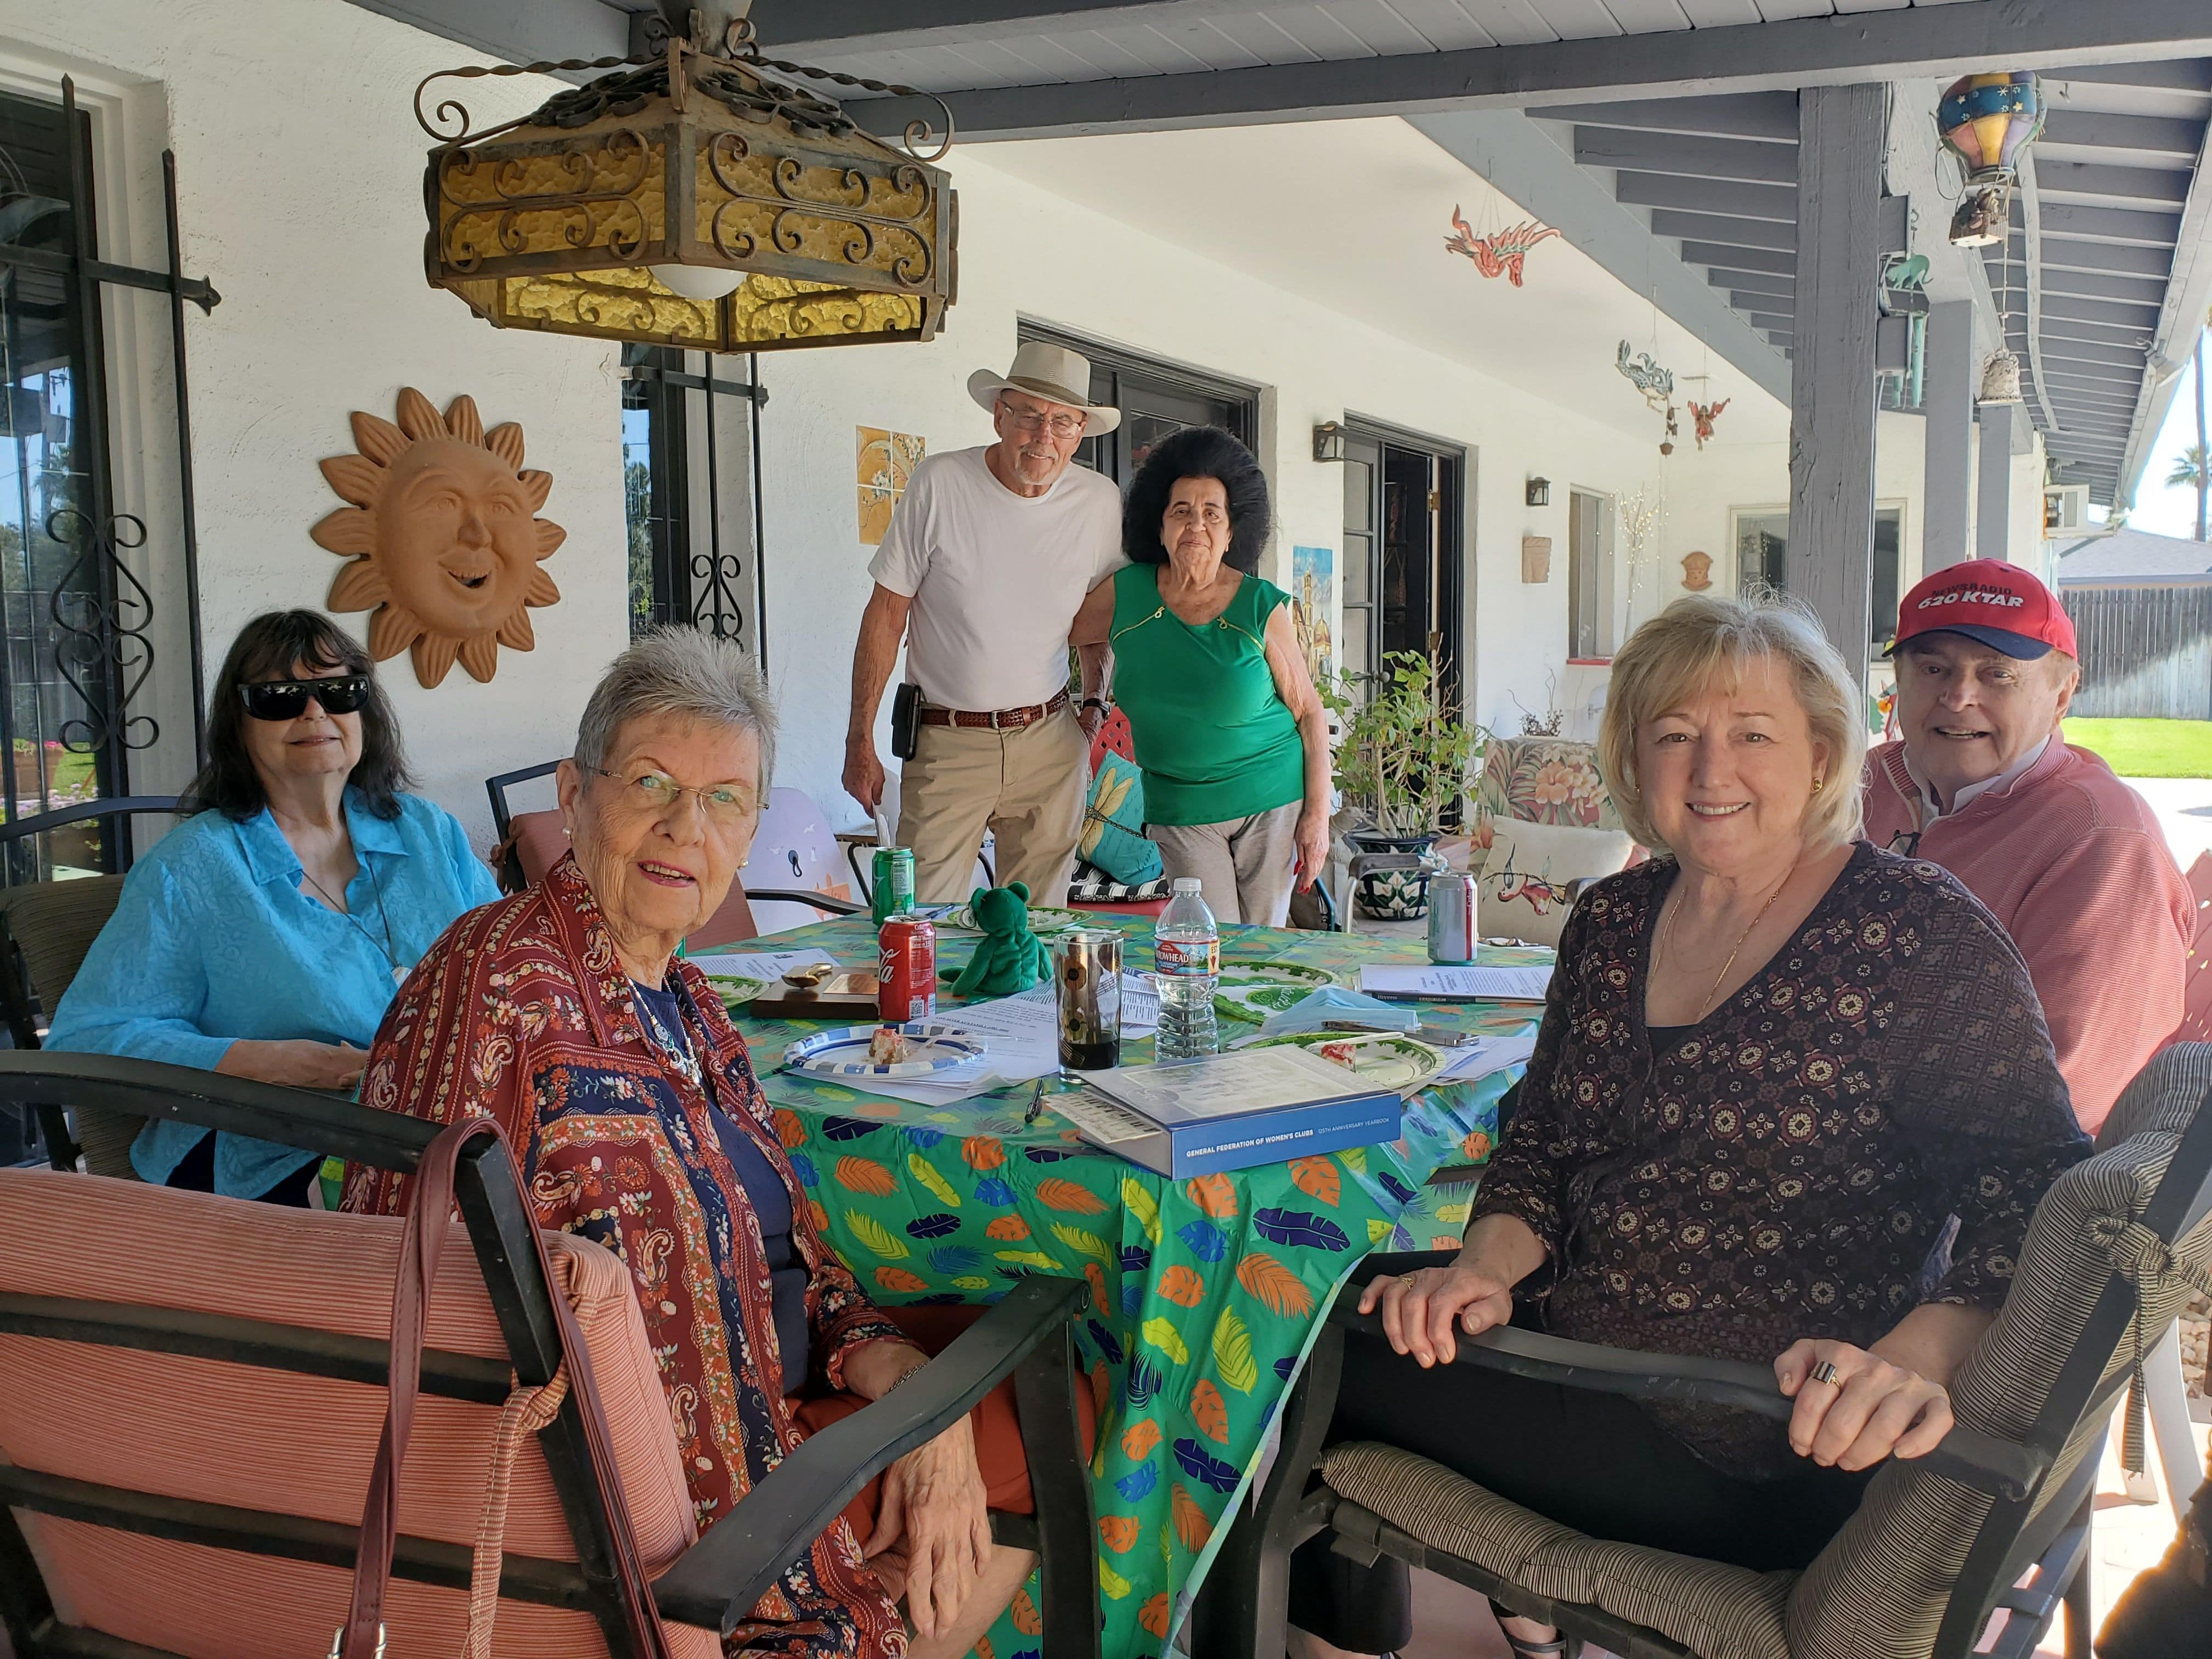 l-r: Polly Schumacher, Geri Rosato, Maurie Helle, Mary Morrison, Lynda Gallagher, Pat McMahon. Not pictured: Thomas Mihalchick